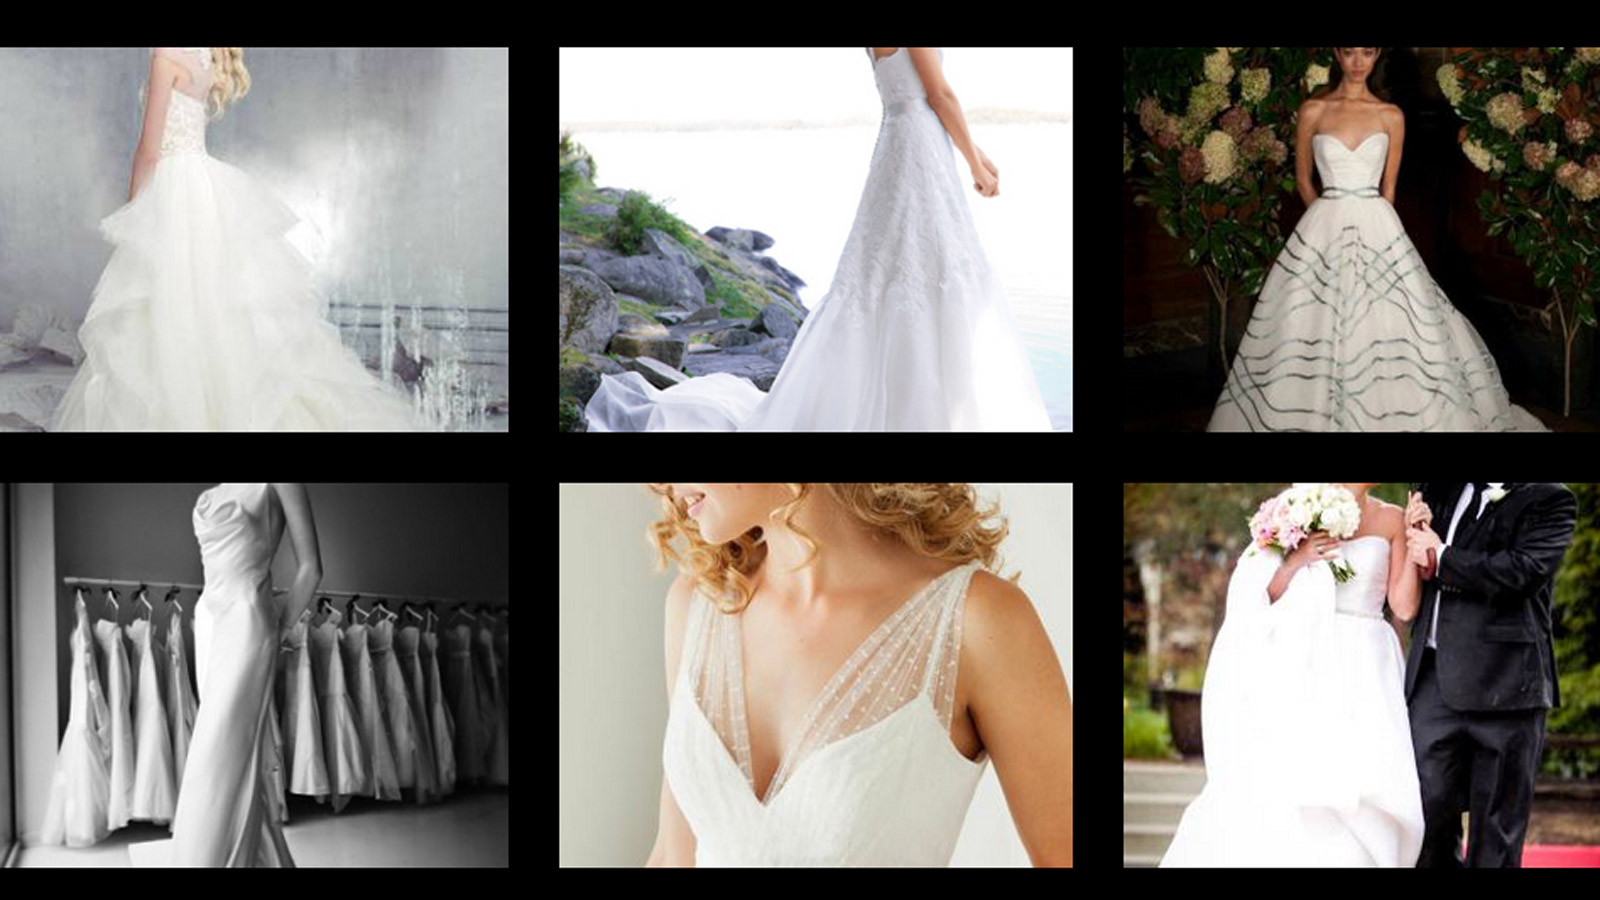 These are 8 of the best wedding dress shops around Denver - Axios Denver